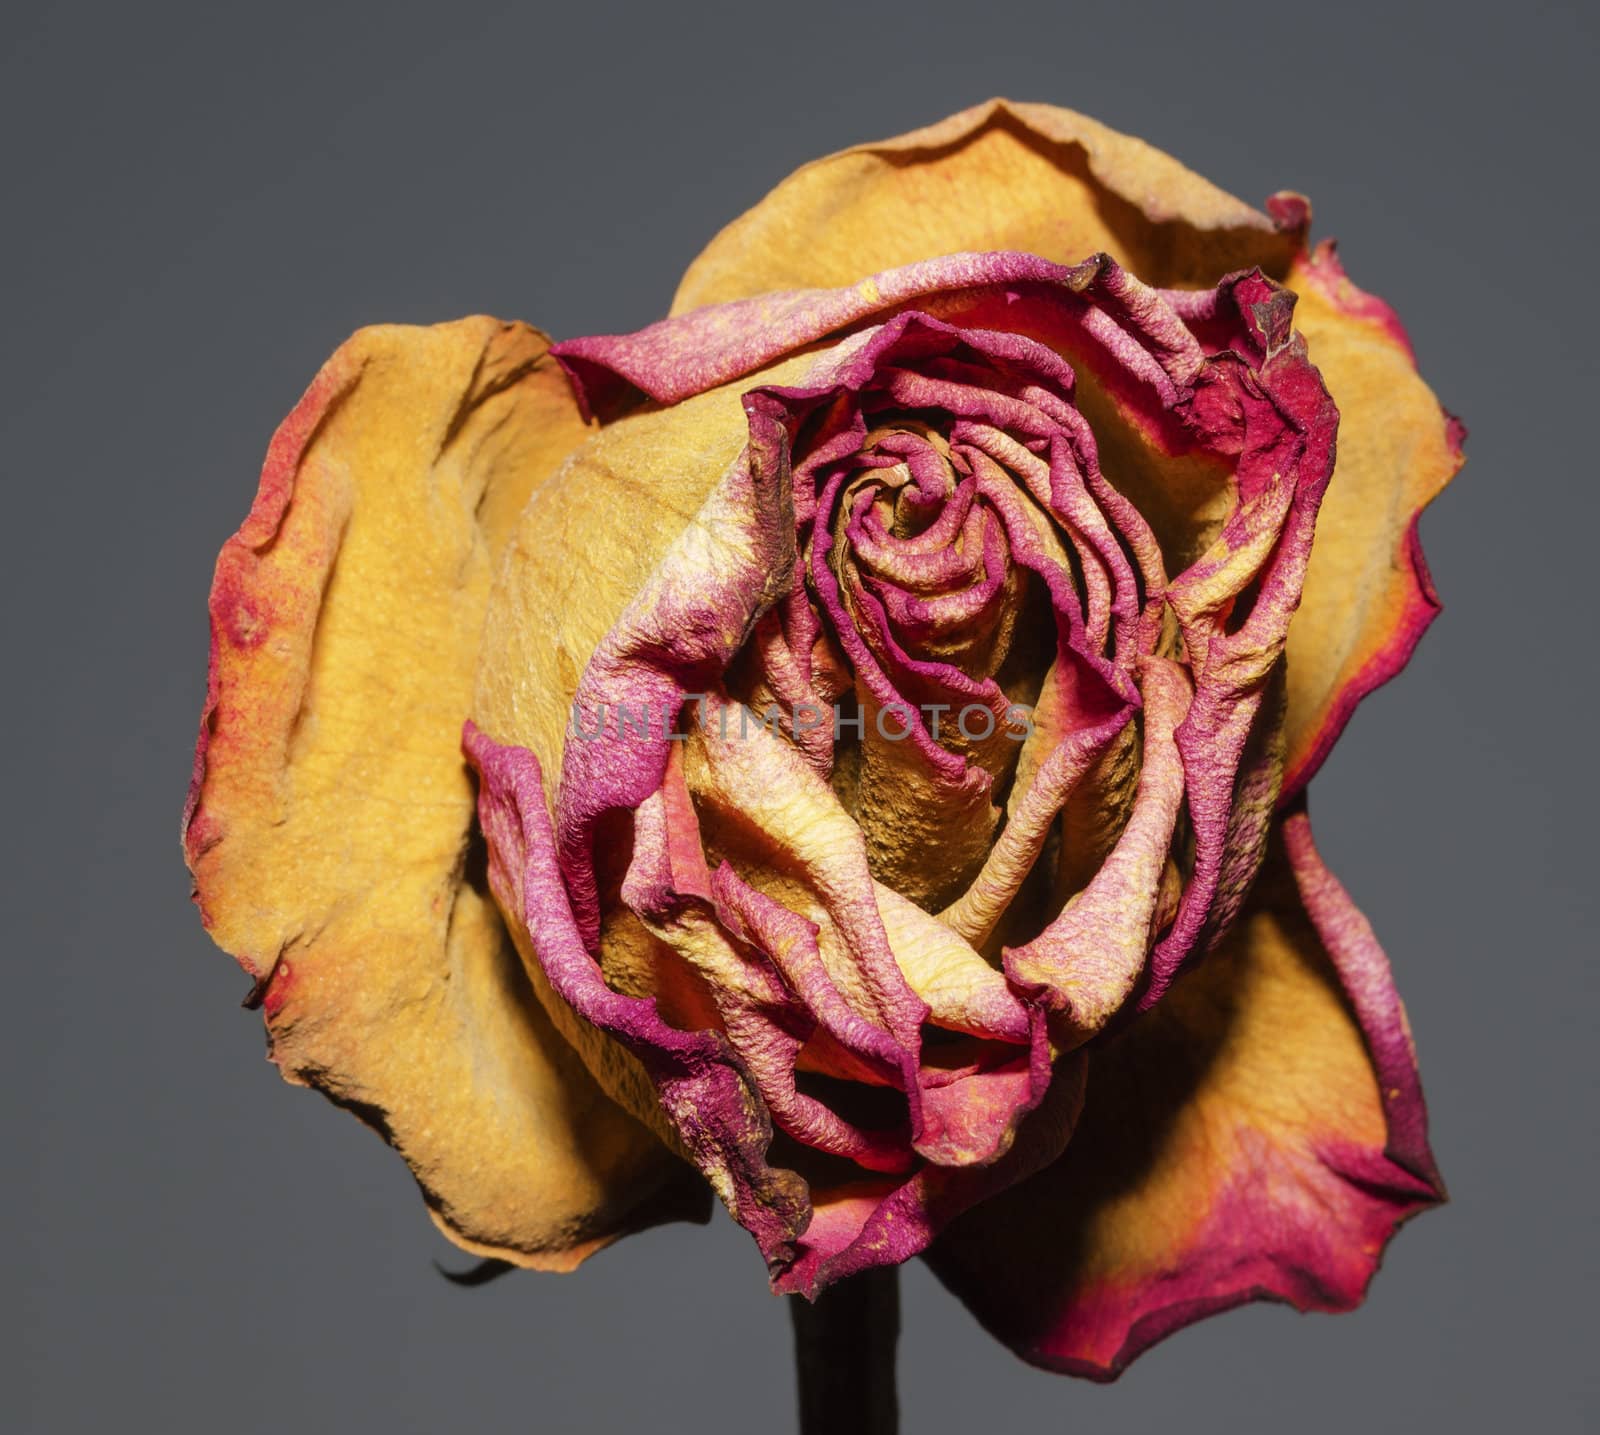 A whithered rose on a gray background